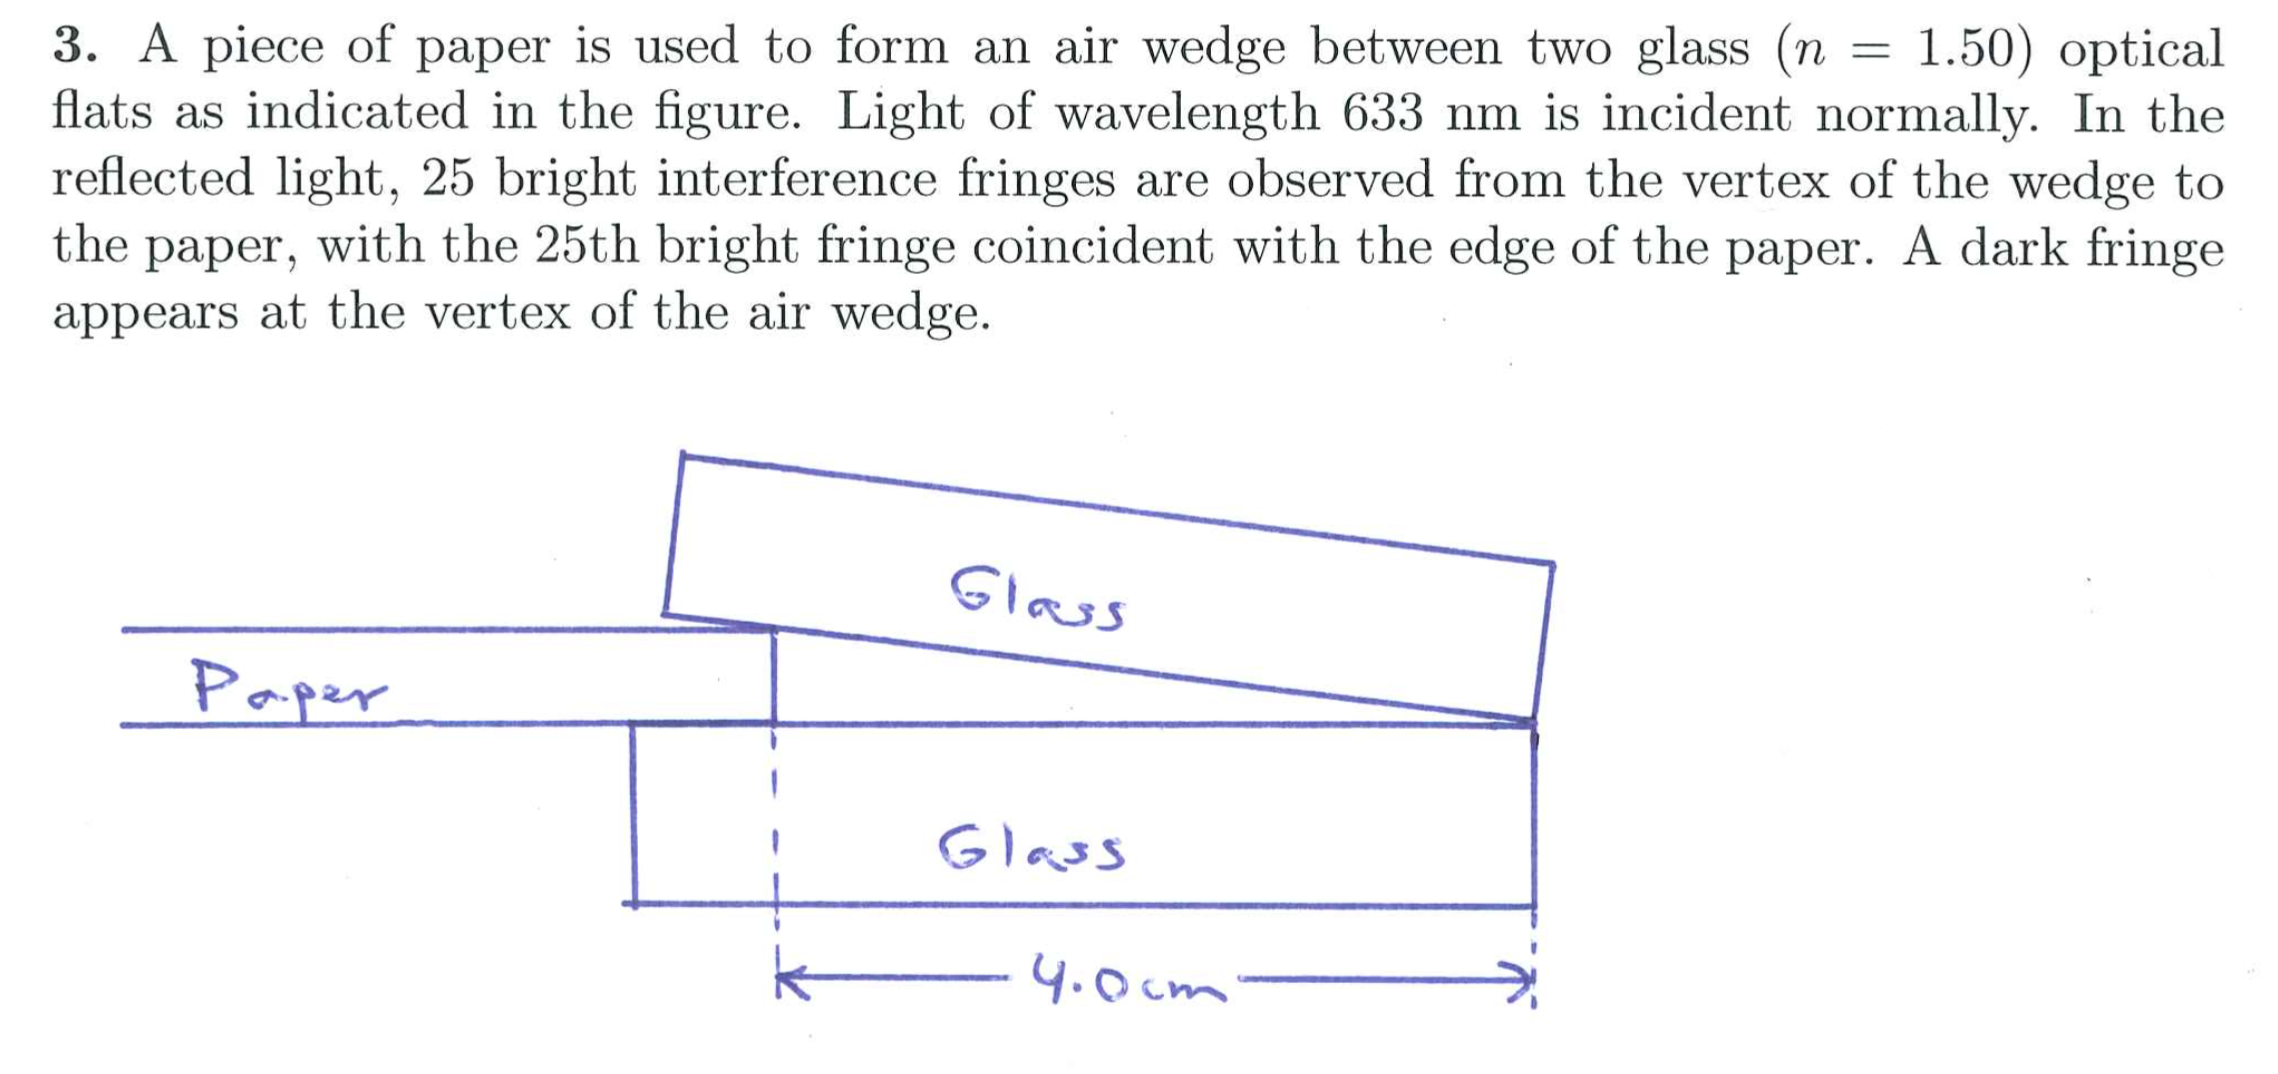 Air wedge interference